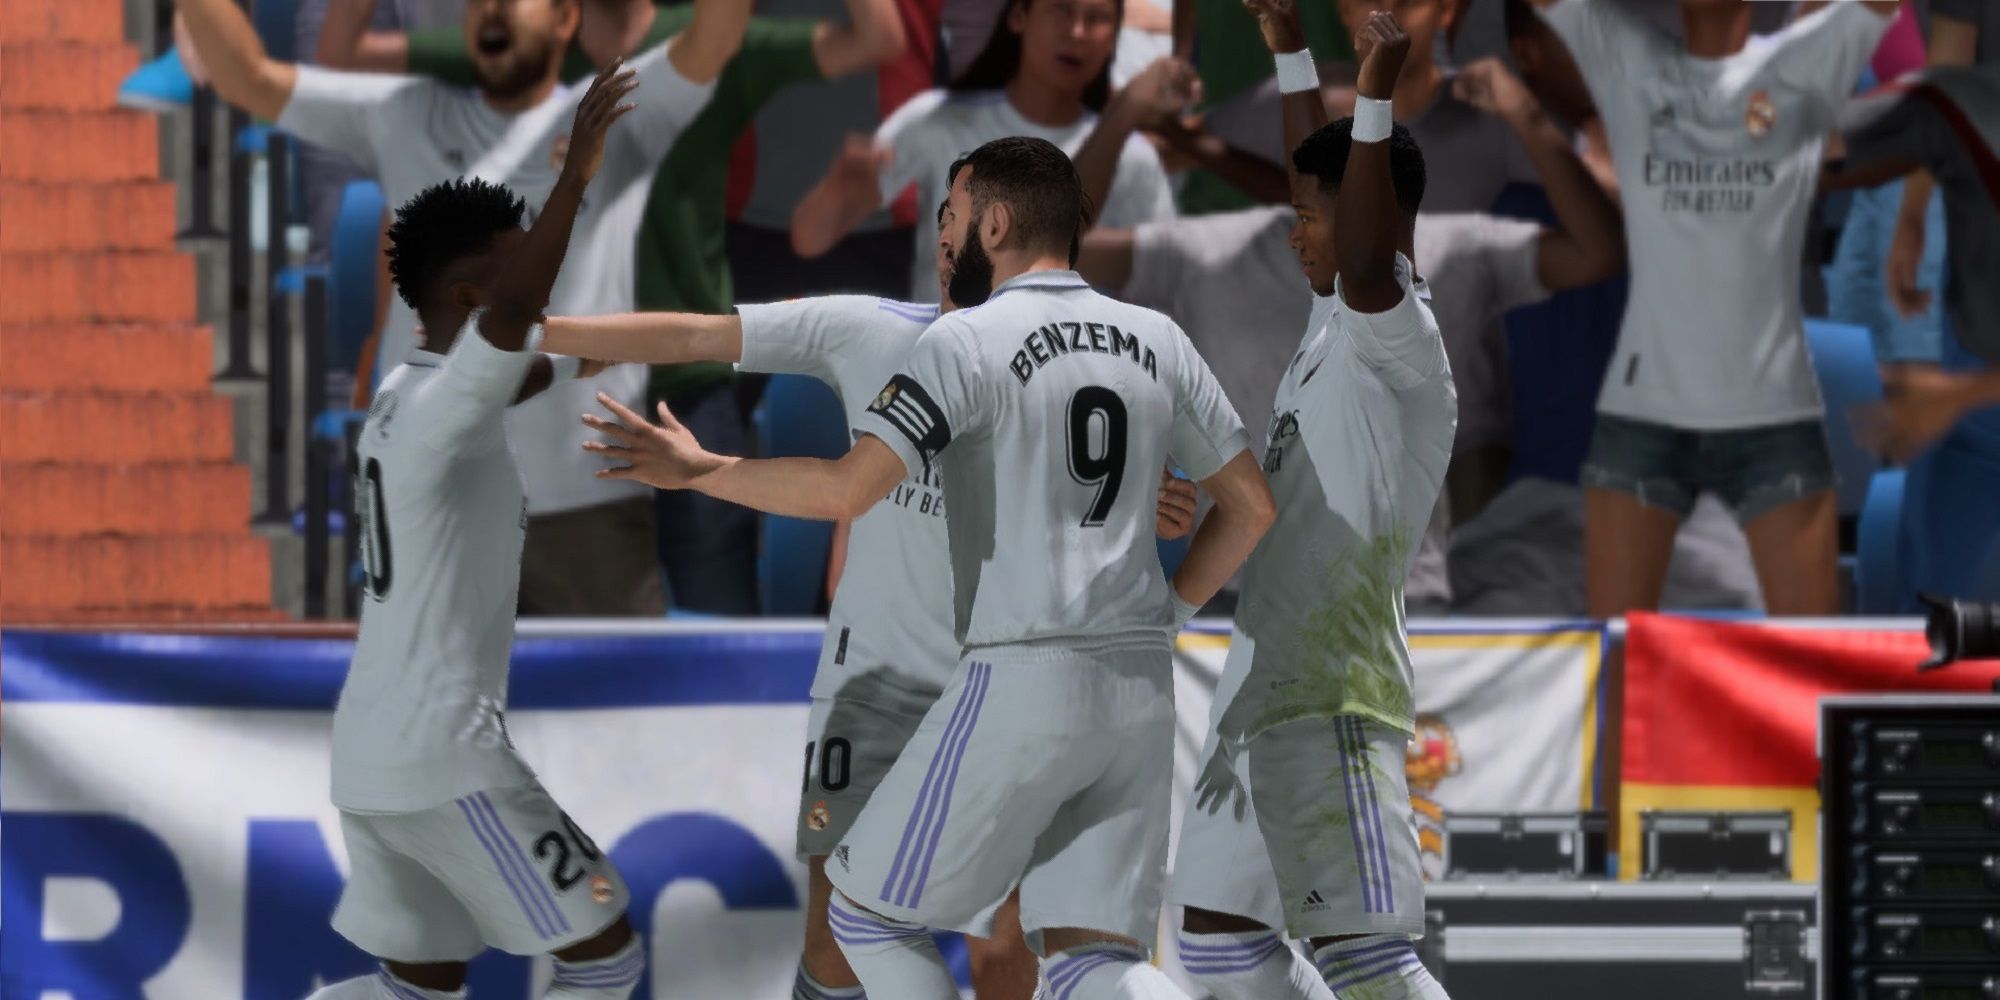 FIFA 23 Karim Benzema and teammates celebrating on the pitch